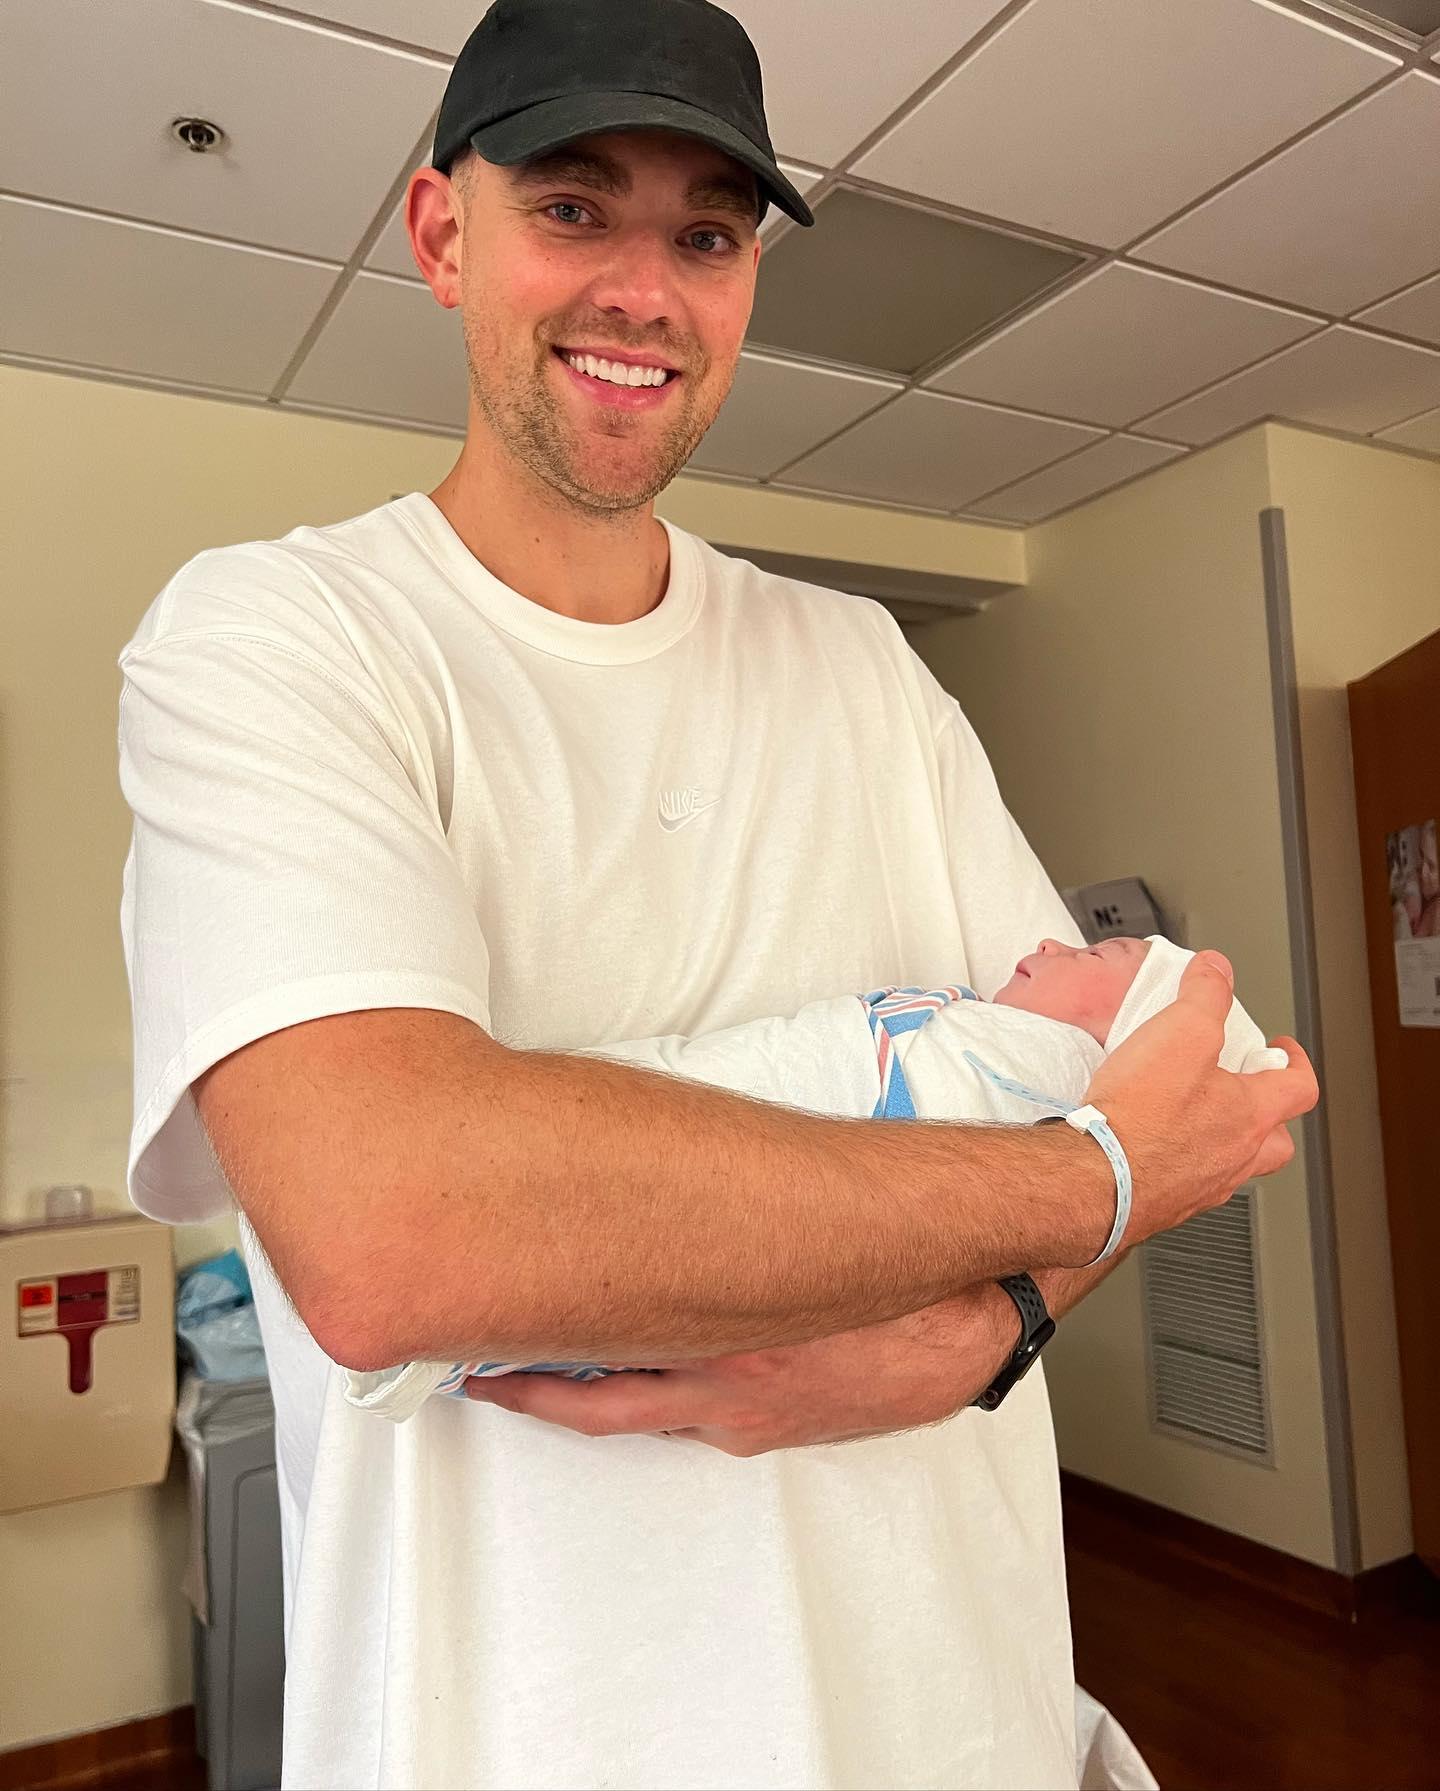 Sydney Cummings and Dustin Houdyshell welcome their first son, Ari Drew Houdyshell, on June 22, 2022 